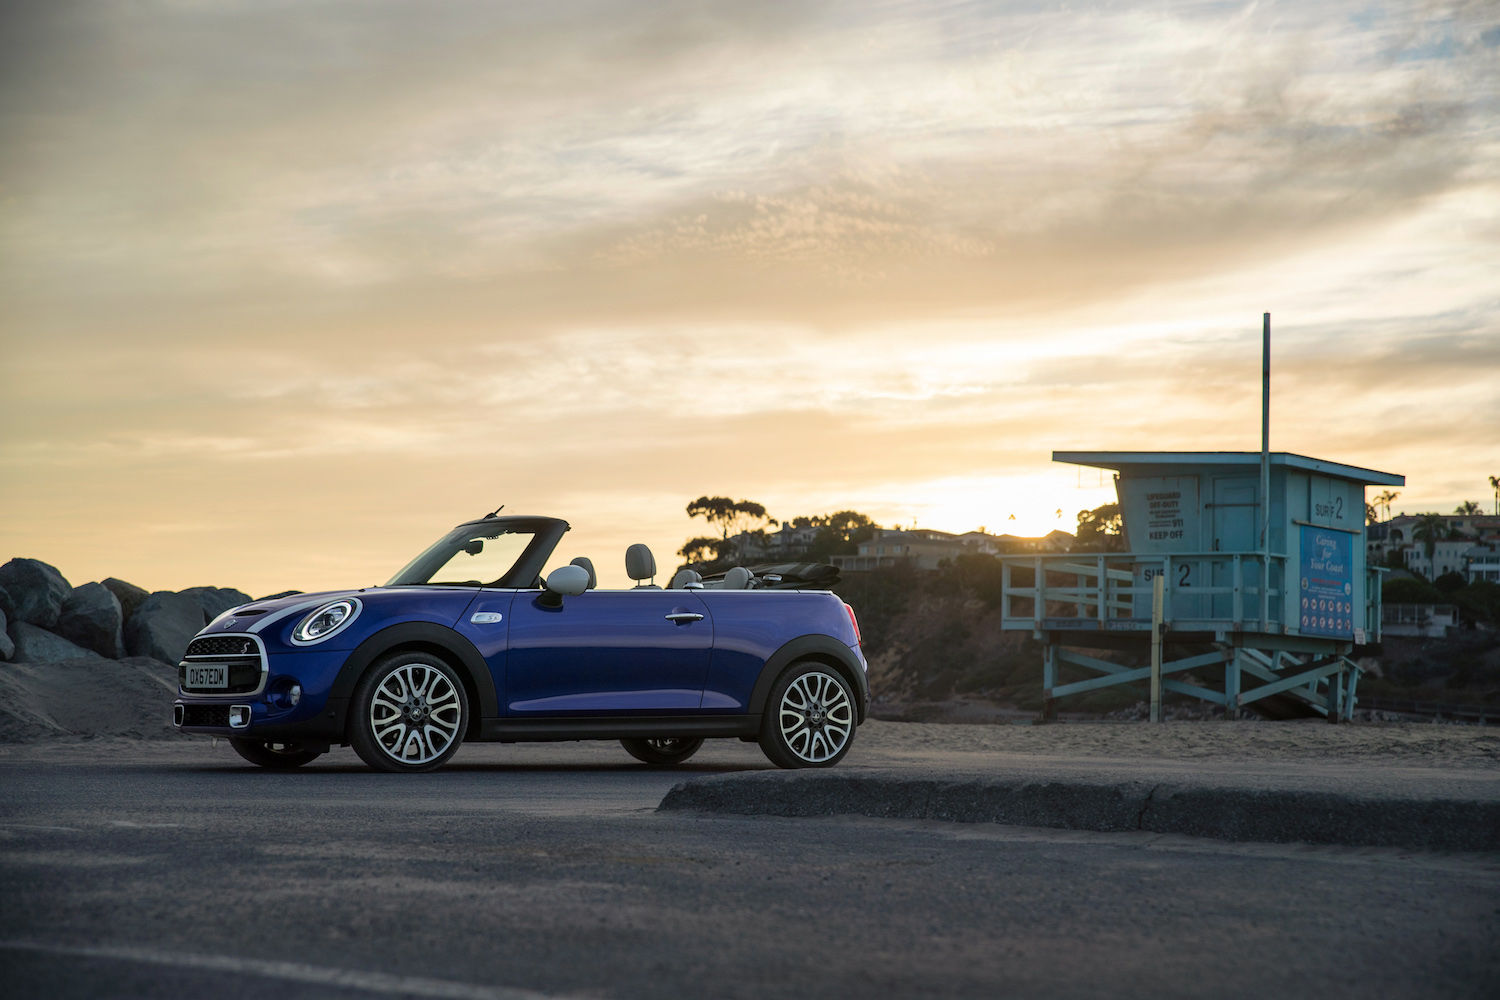 Review: the MINI Cooper S Convertible is a pint-sized bundle of big fun